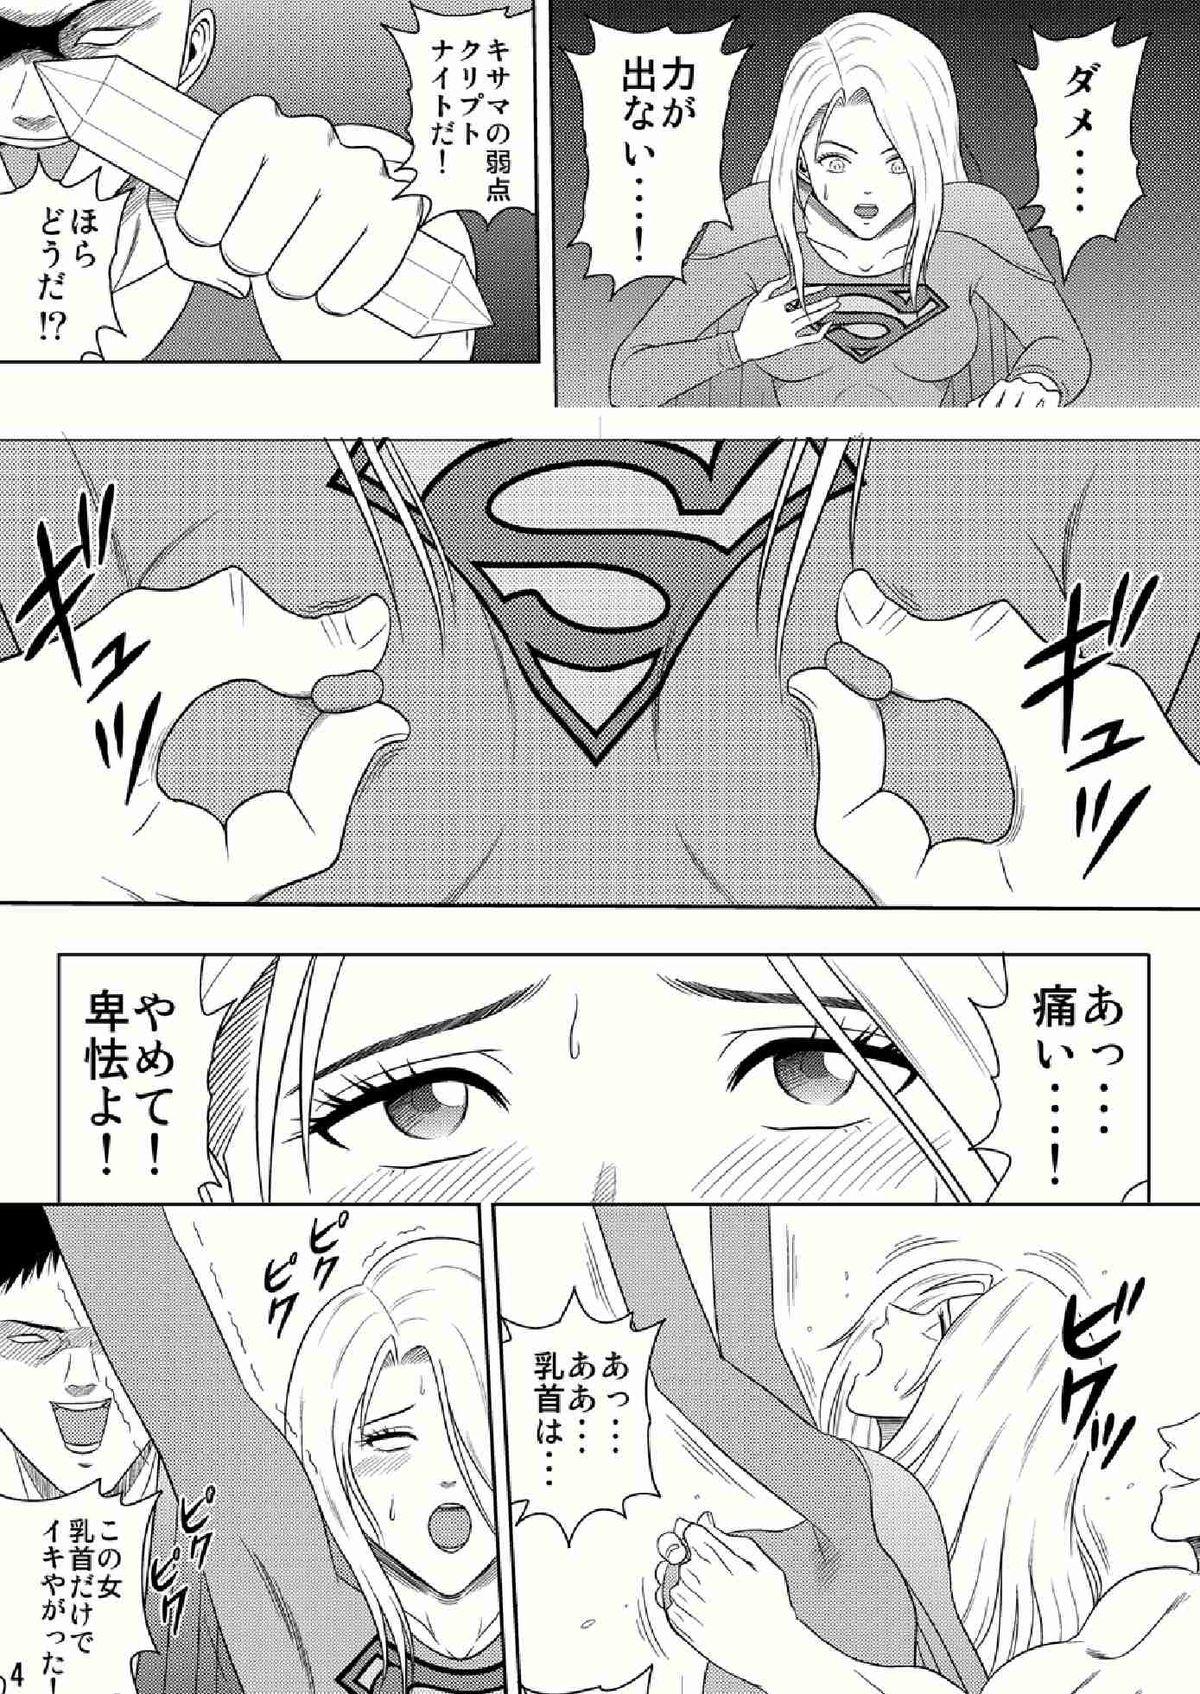 Homosexual Toukikoubou vol.2 SUPER GIRL Leaked - Page 4